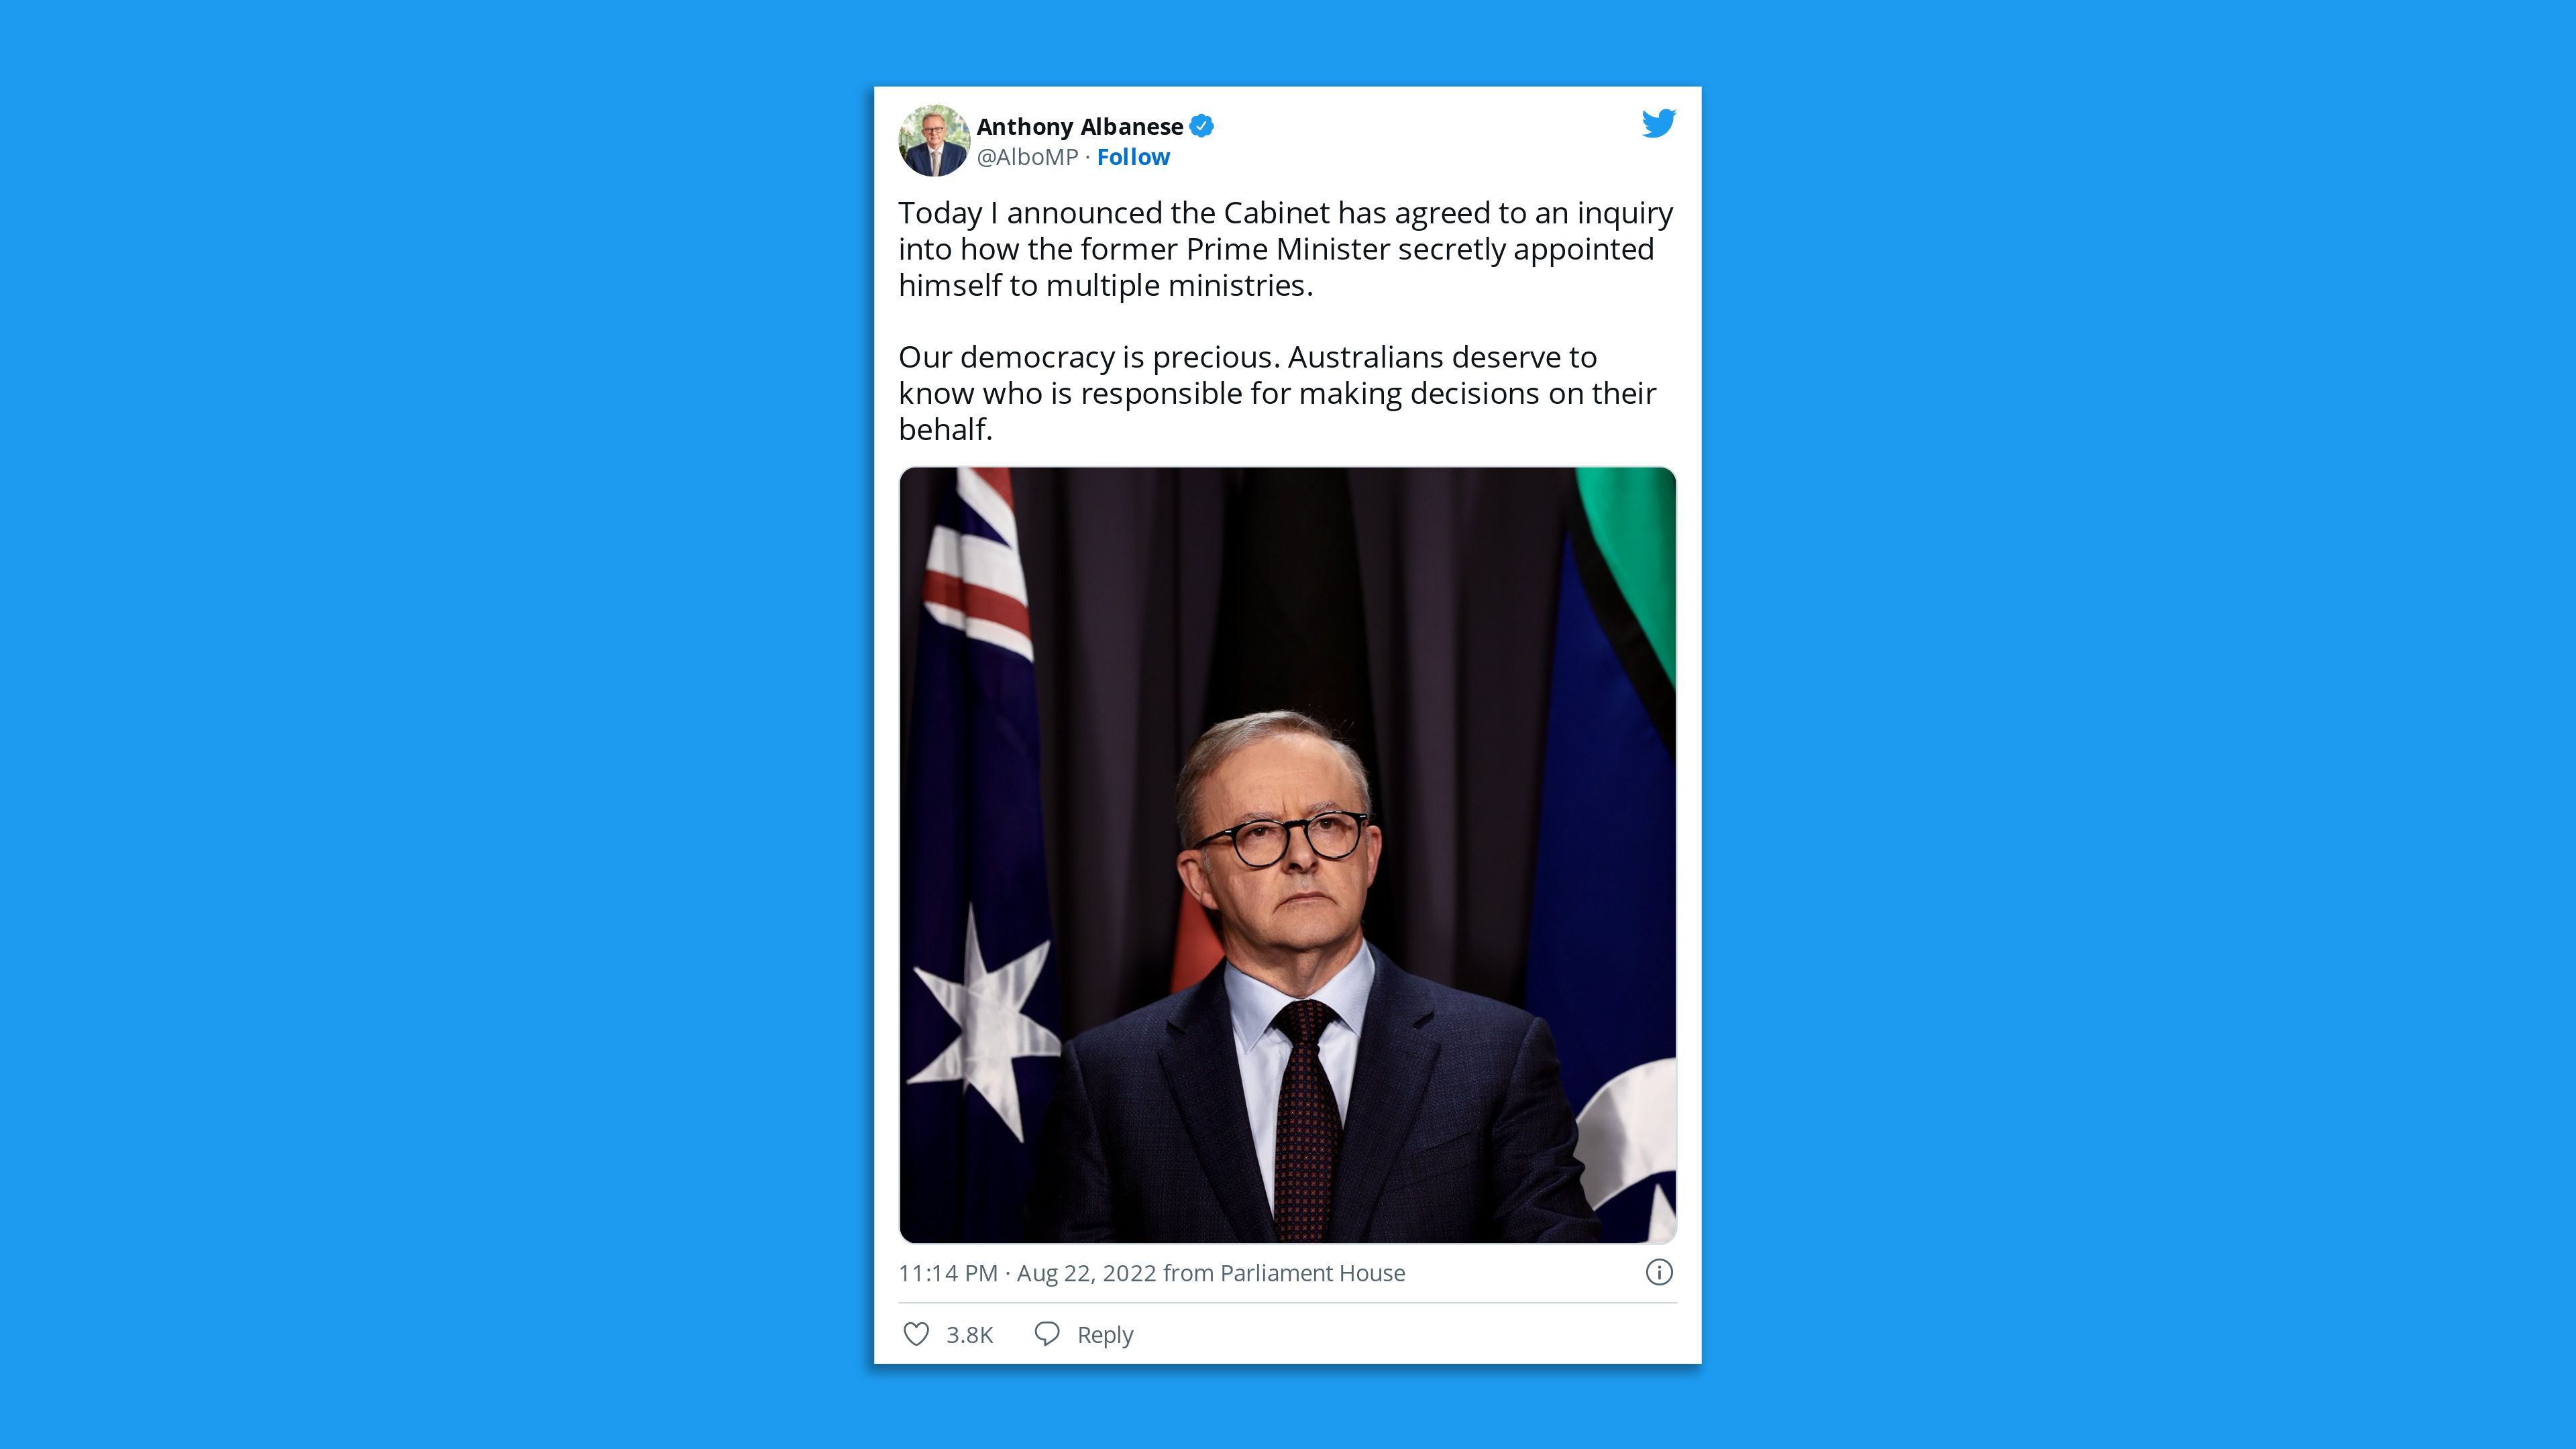 A screenshot of Australian Prime Minister Anthony Albanese's tweet announcing an inquiry into his predecessor Scott Morrison.